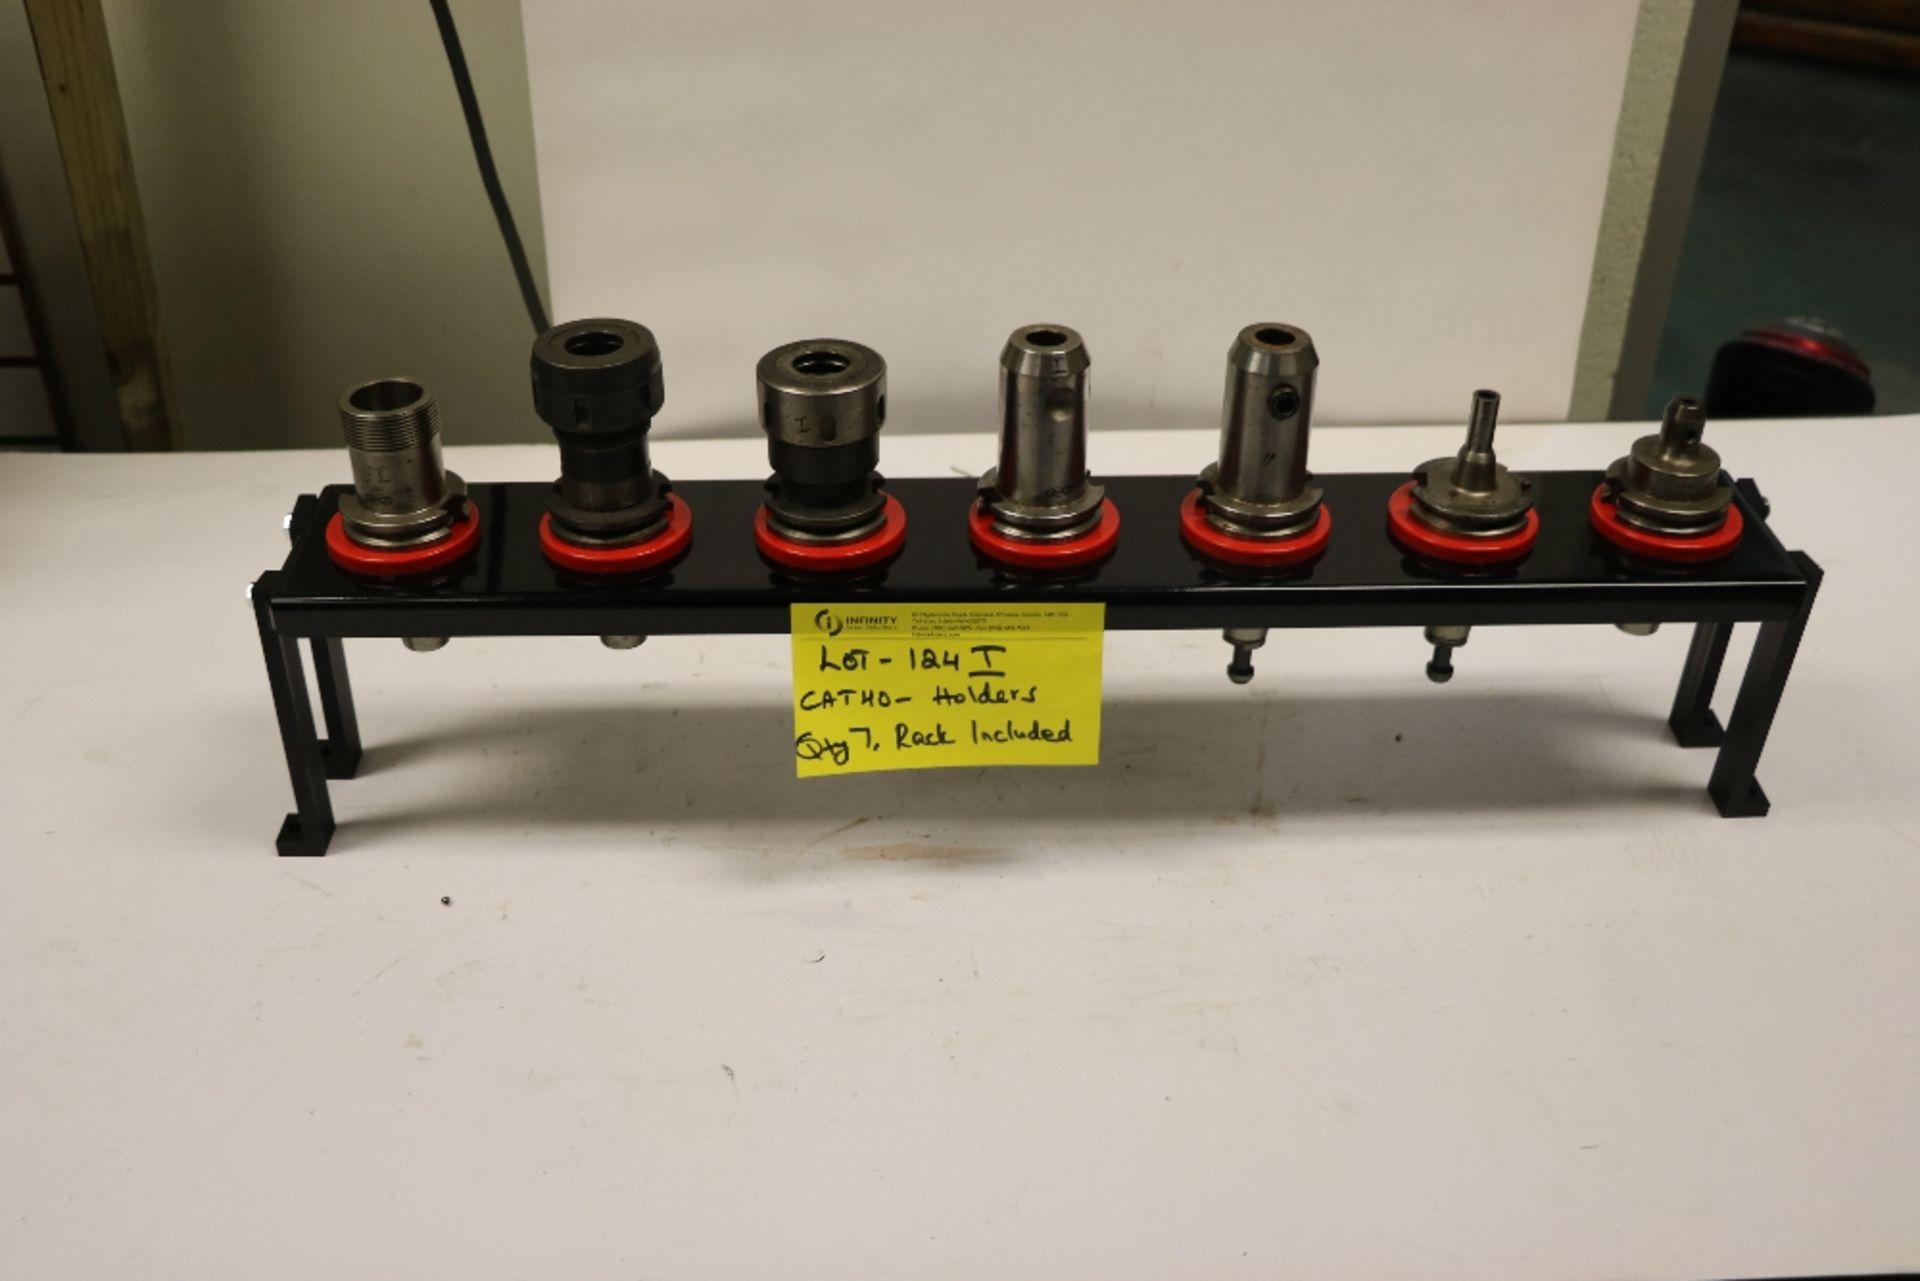 CAT 40 Tool holders with rack